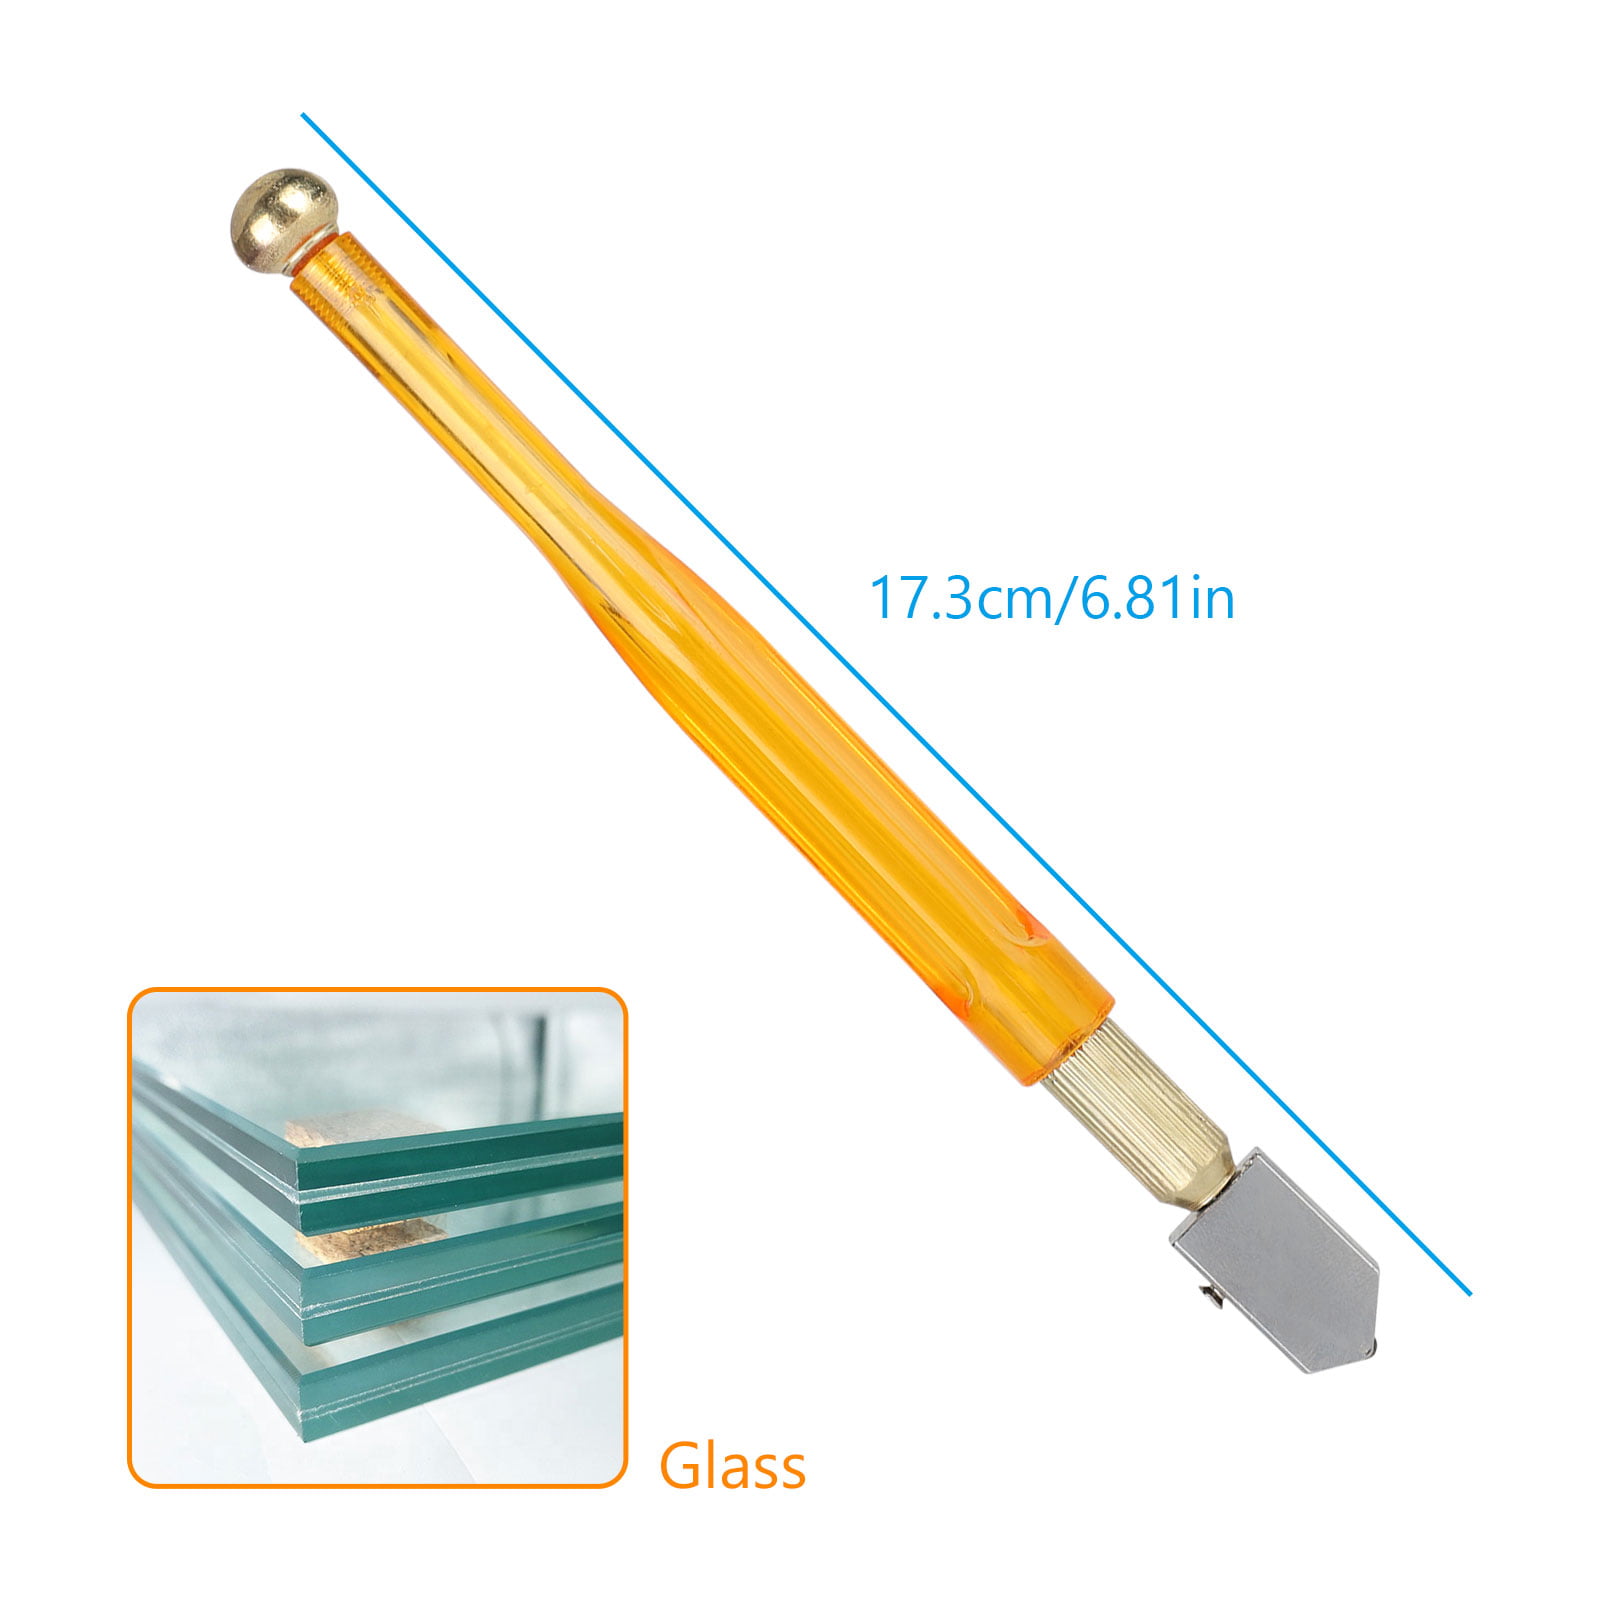 Obeka 5mm-15mm Oil Feed Glass Cutter Pencil Style Metal Handle Cutting  Tools Tungsten Carbide Tip with Oil Reservoir for Mosaic Tiles Stained  Glass